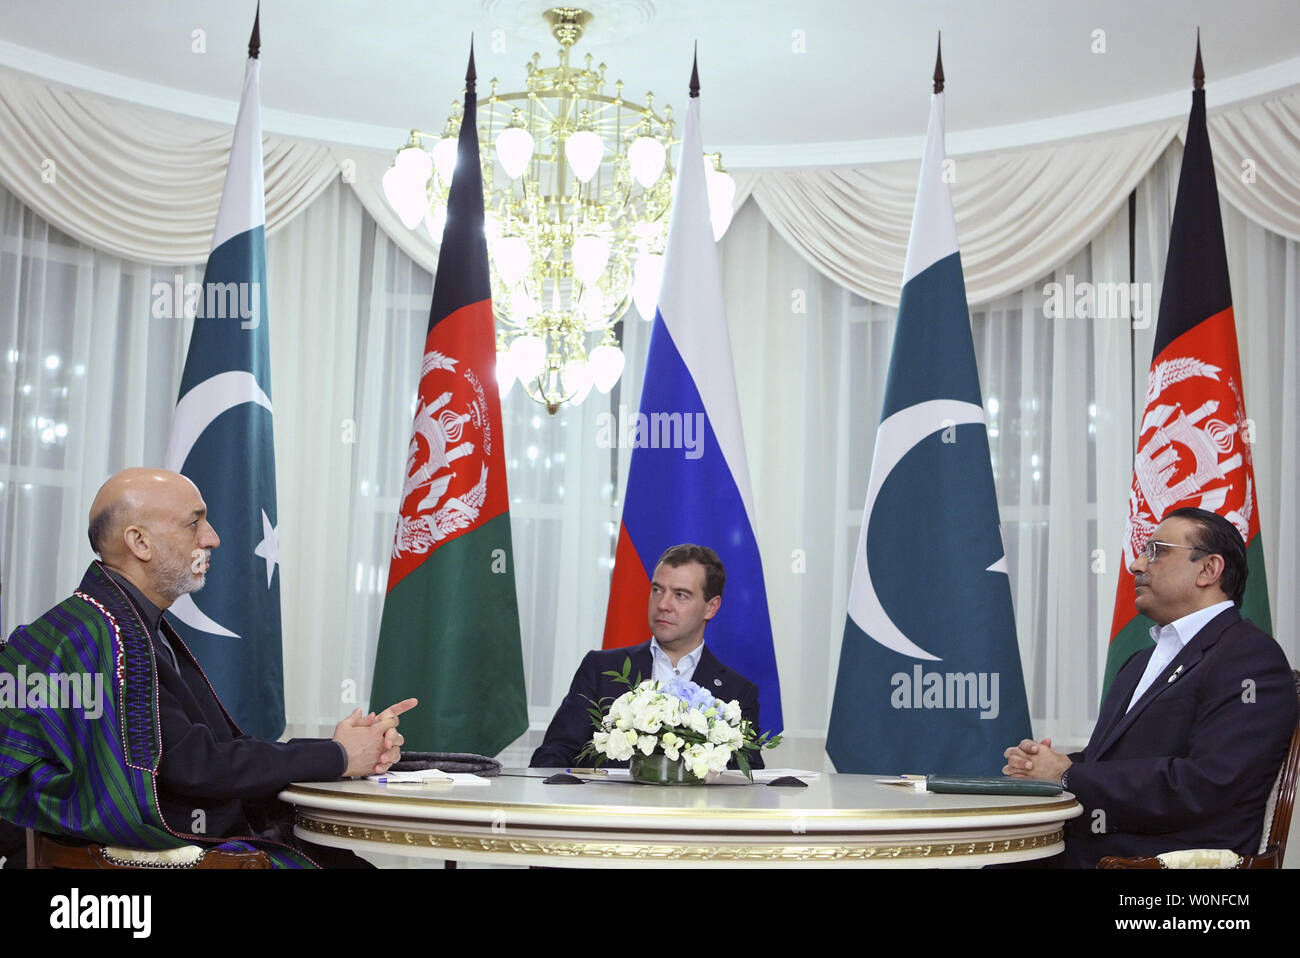 Russian President Dmitry Medvedev (C), Afghan President Hamid Karzai (L) and Pakistan President Asif Ali Zardari meet during the Shanghai Cooperation Organization (SCO) summit at a government residence outside of the Ural Mountains city of Yekaterinburg on June 15, 2009. The SCO groups Russia, China, Kazakhstan, Uzbekistan, Tajikistan and Kyrgyzstan but leaders of Afghanistan, Pakistan and India and Iran will also attend the summit. (UPI Photo/Anatoli Zhdanov) Stock Photo